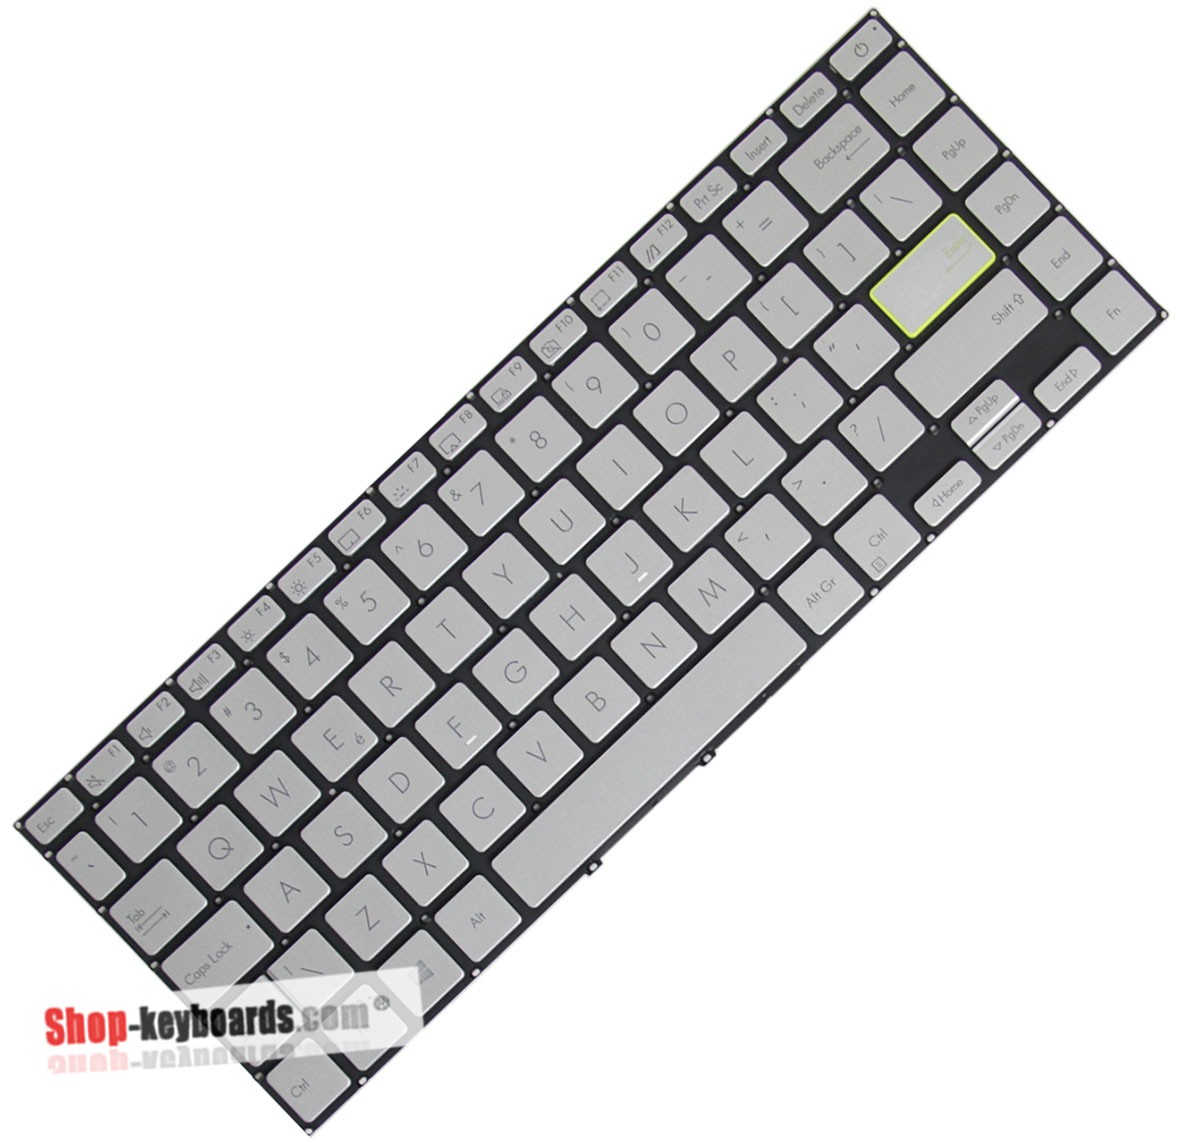 Asus 0KNB0-212PND00 Keyboard replacement